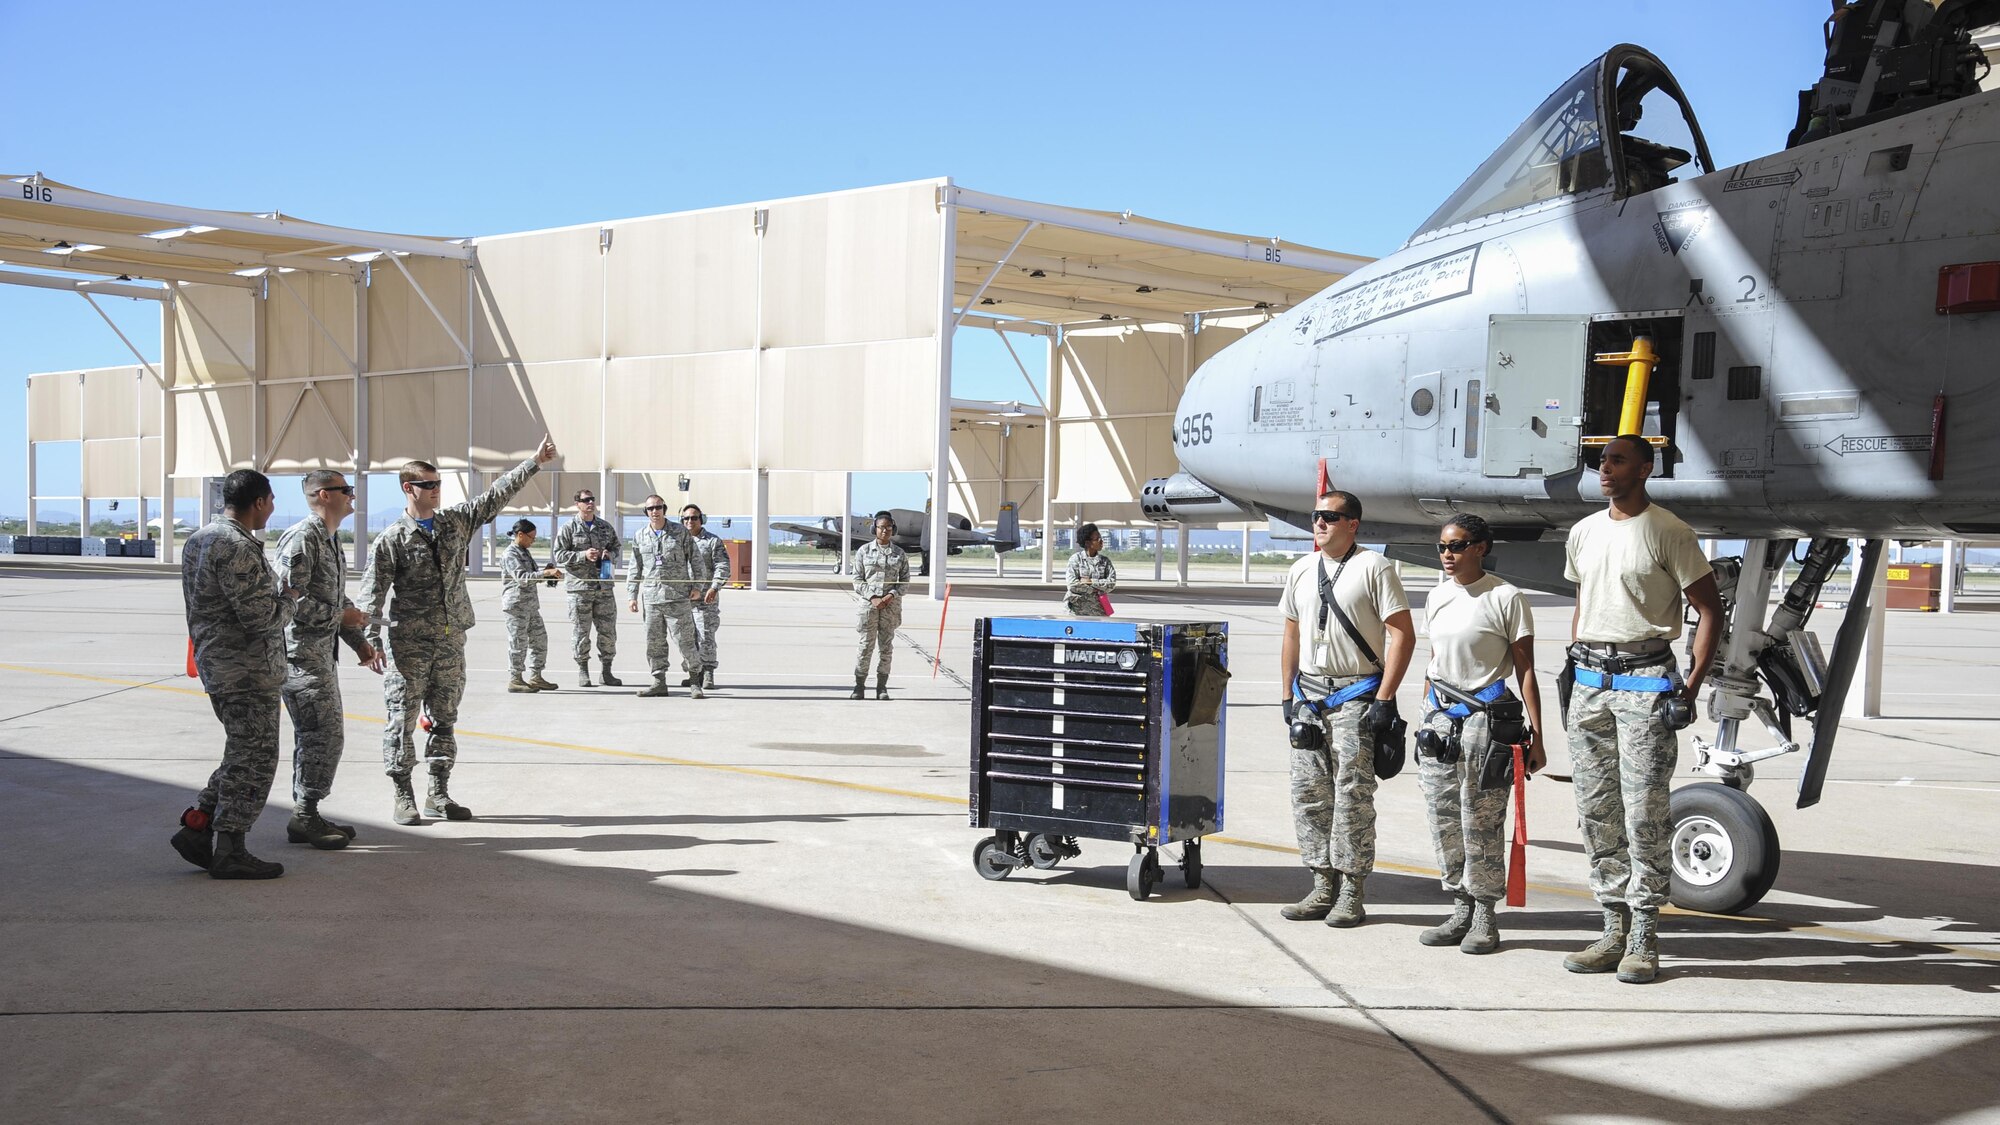 U.S. Airmen assigned to the 354th Aircraft Maintenance Unit stand at attention before a load crew of the quarter competition at Davis-Monthan Air Force Base, Ariz., Oct. 7, 2016. This quarter's competition was between the 354th, 357th and 924th aircraft maintenance units. (U.S. Air Force photo by Airman 1st Class Mya M. Crosby)